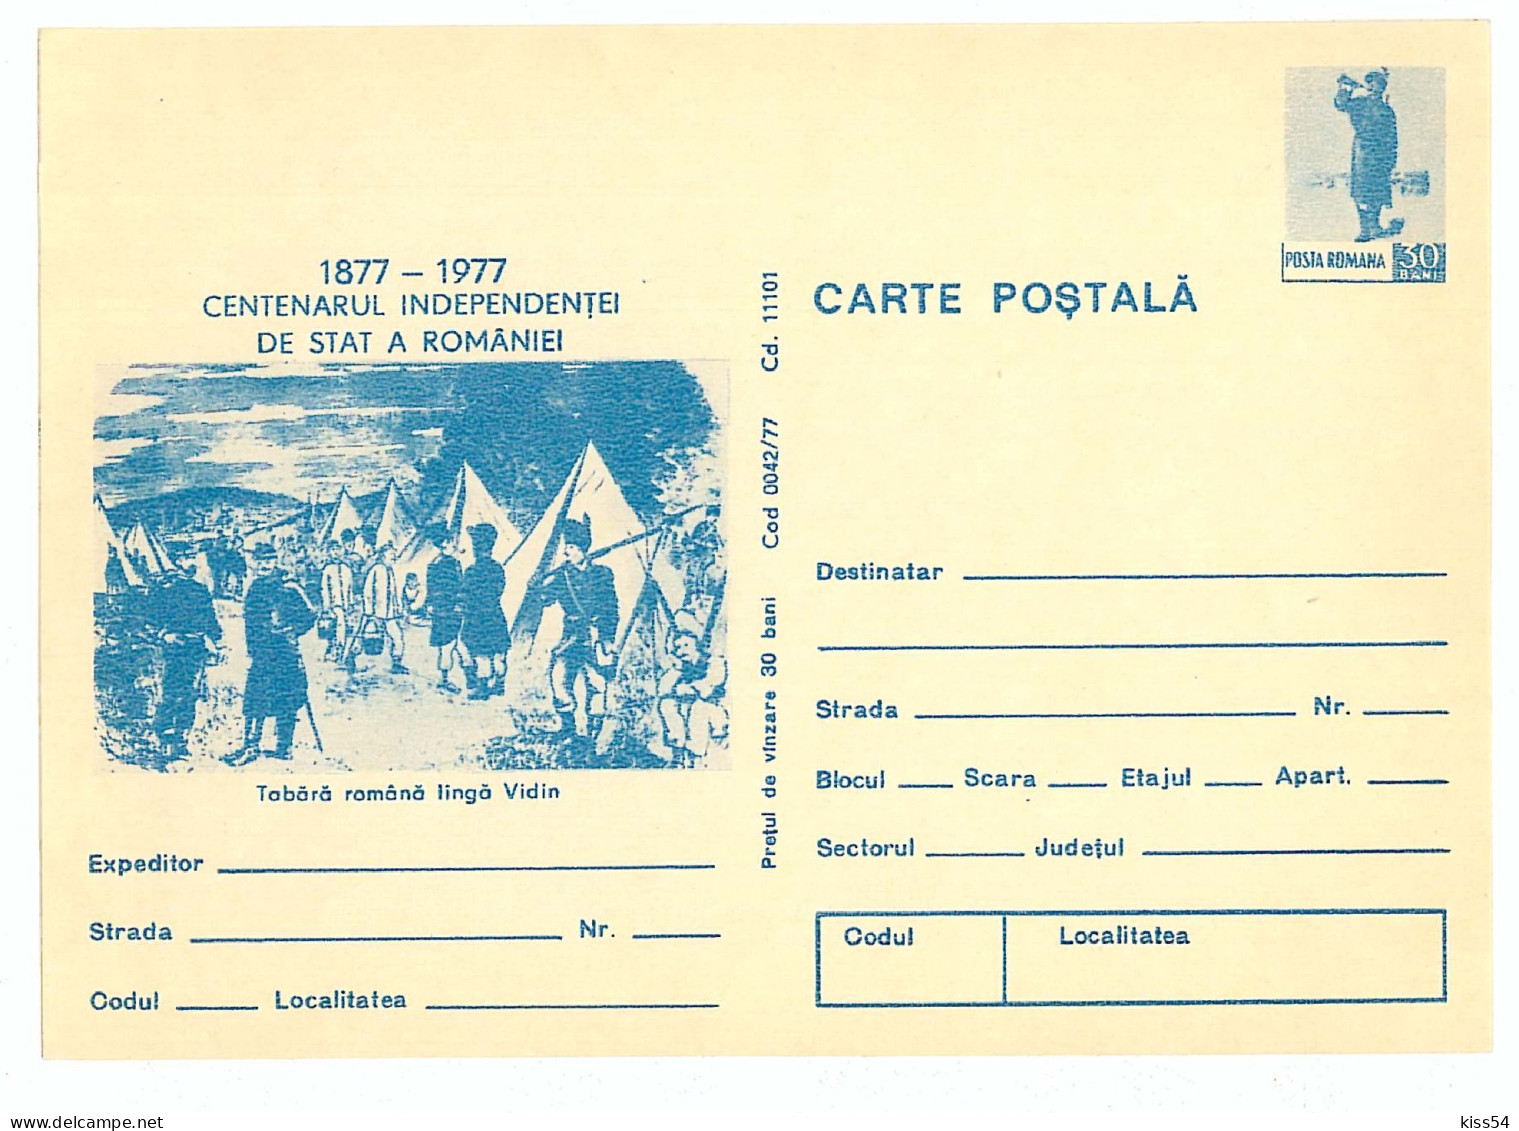 IP 77 A - 42 Centenary Independence Of Romania - Stationery - Unused - 1977 - Postal Stationery